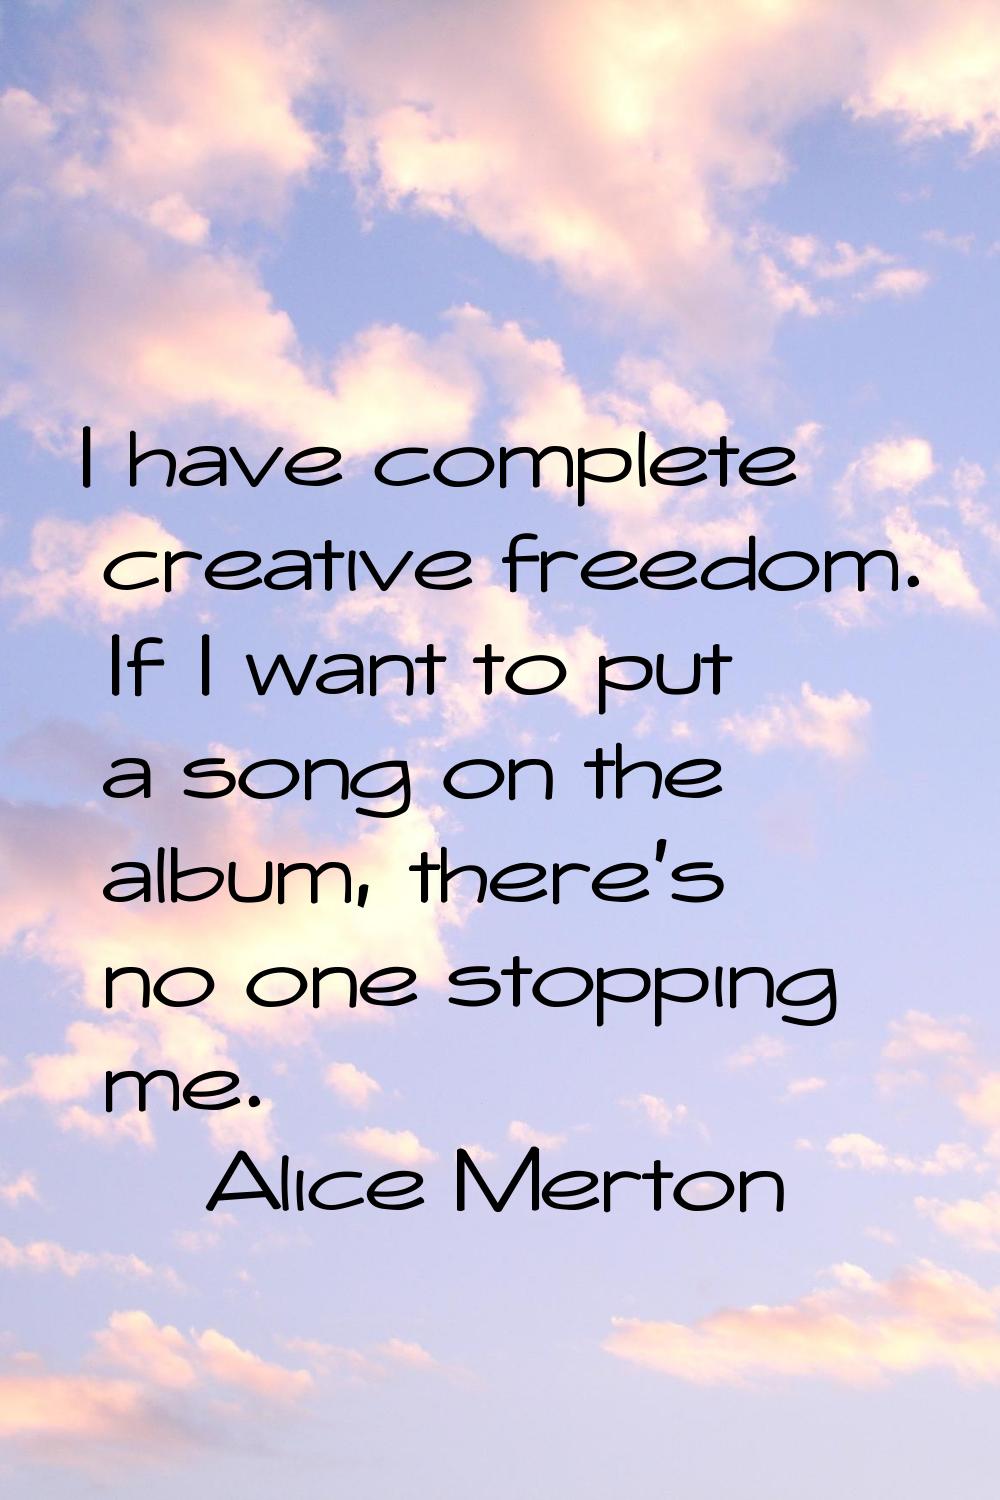 I have complete creative freedom. If I want to put a song on the album, there's no one stopping me.